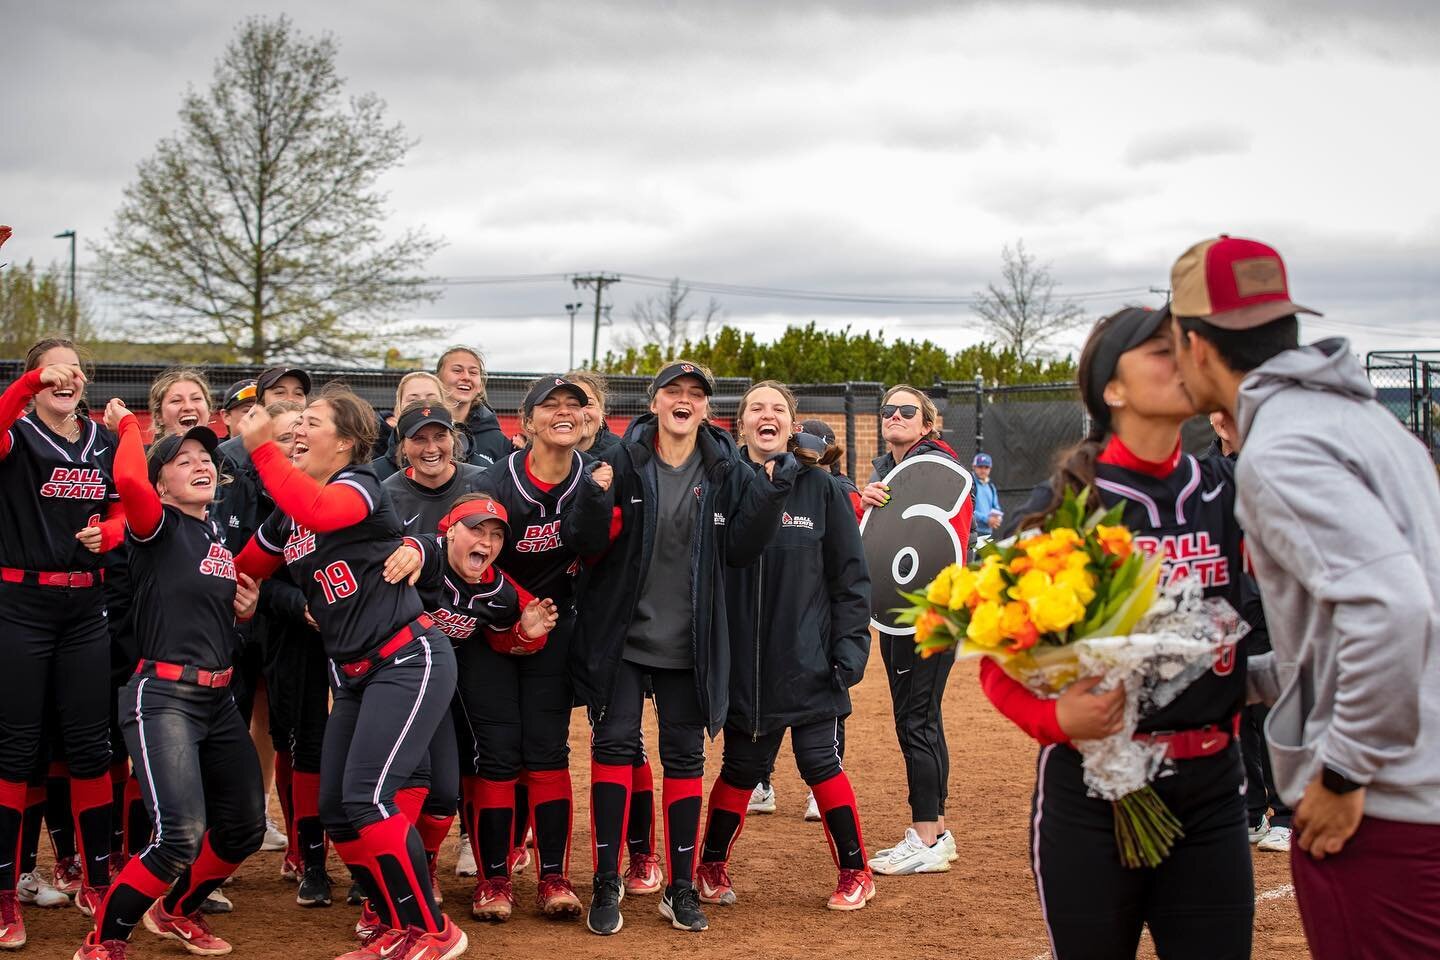 Softball&rsquo;s senior day ended on an even higher note when Amaia Daniel kissed her fianc&eacute; after her teammates chanted &ldquo;Kiss! Kiss!&rdquo; The Cardinals completed a series sweep of Buffalo with an 11-3 win. 

#ballstate #ballstateunive